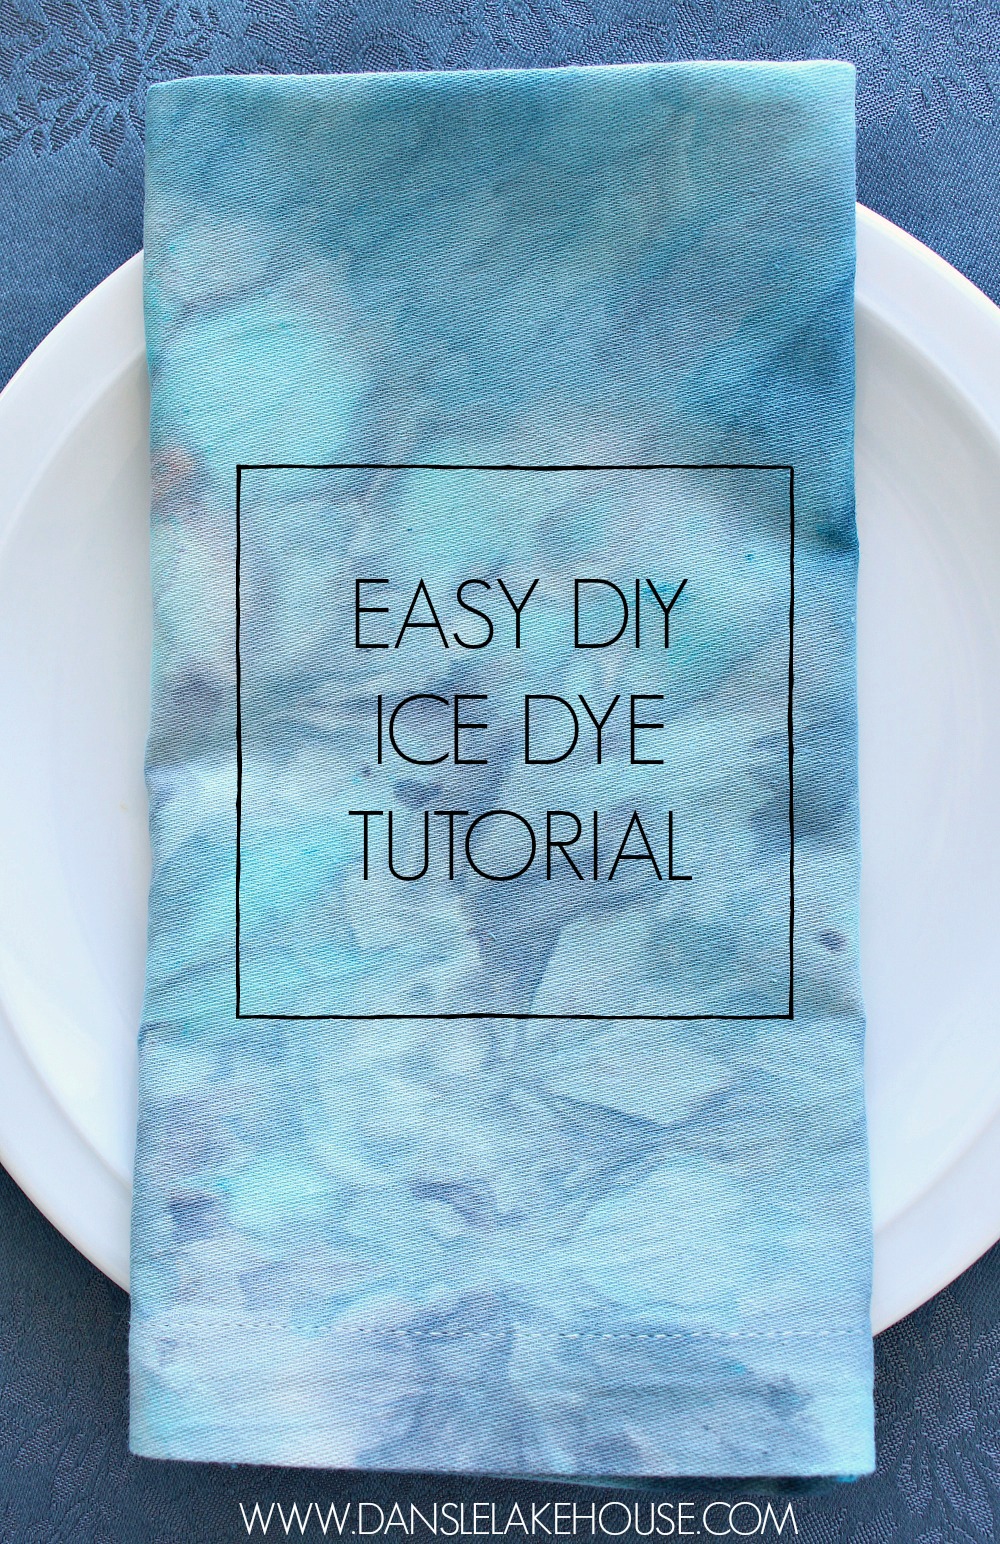 Easy DIY Ice Dyed Fabric Tutorial | Dans le Lakehouse